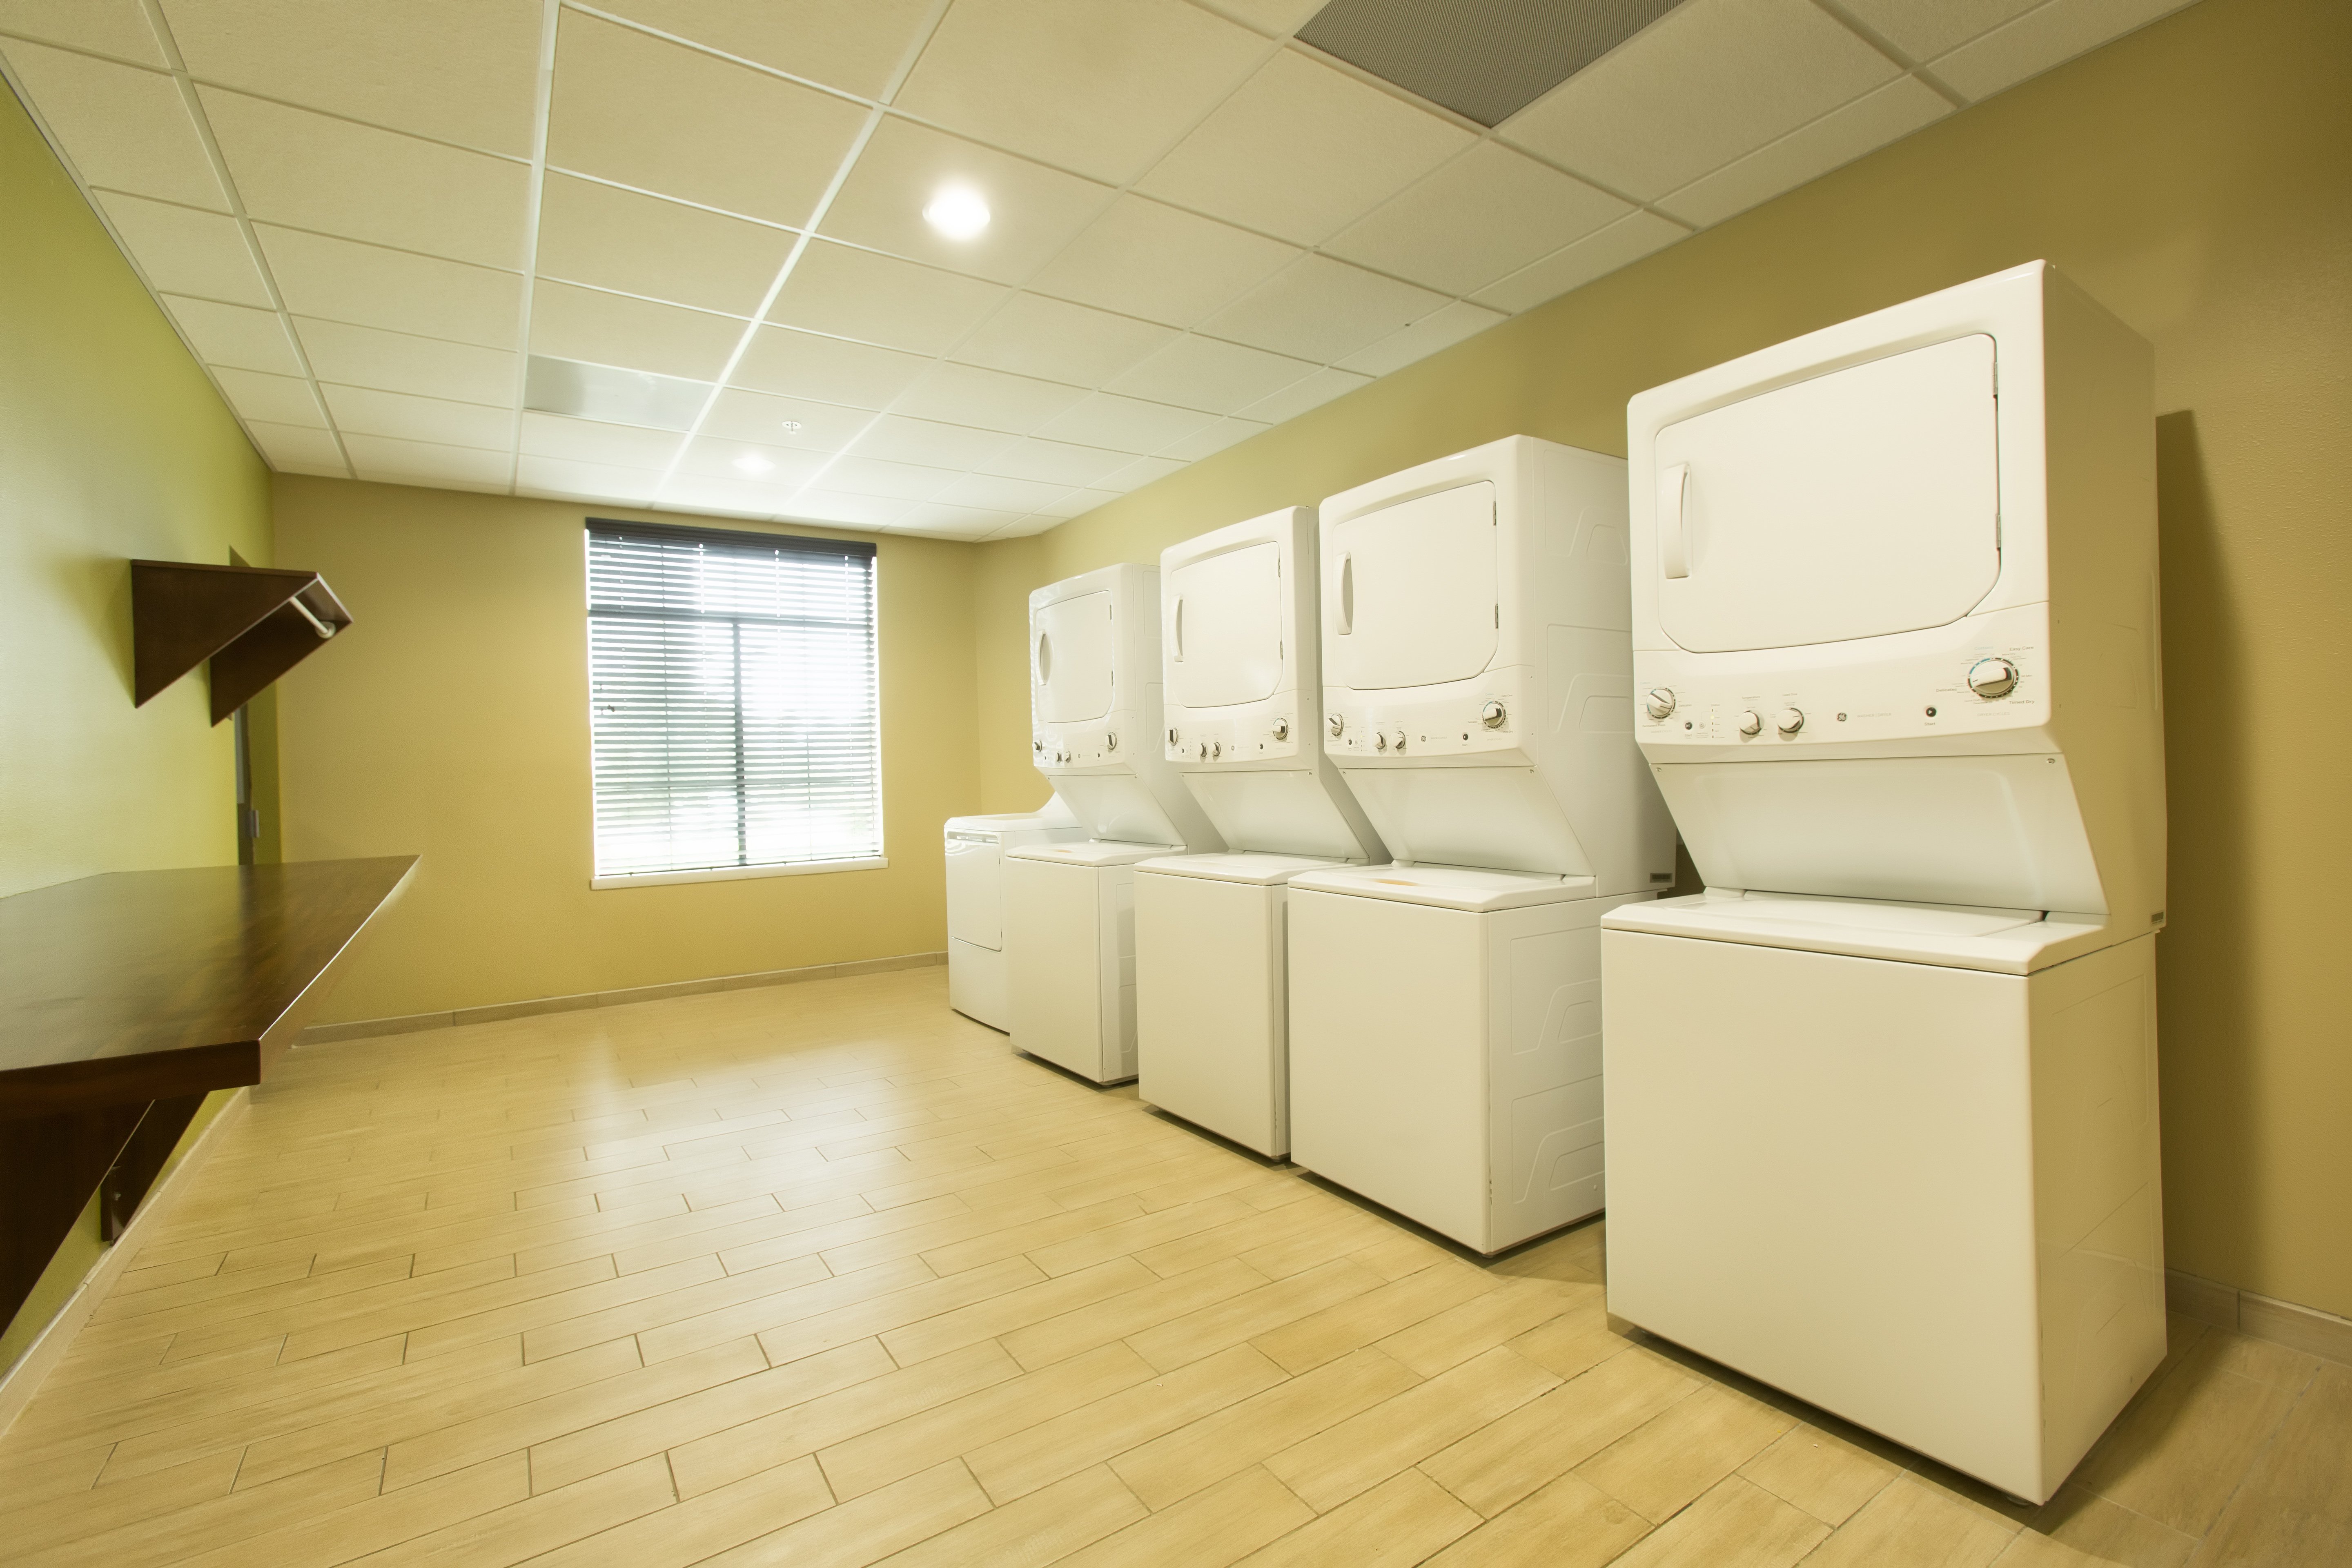 Our newly remodeled laundry room is open 24 hours